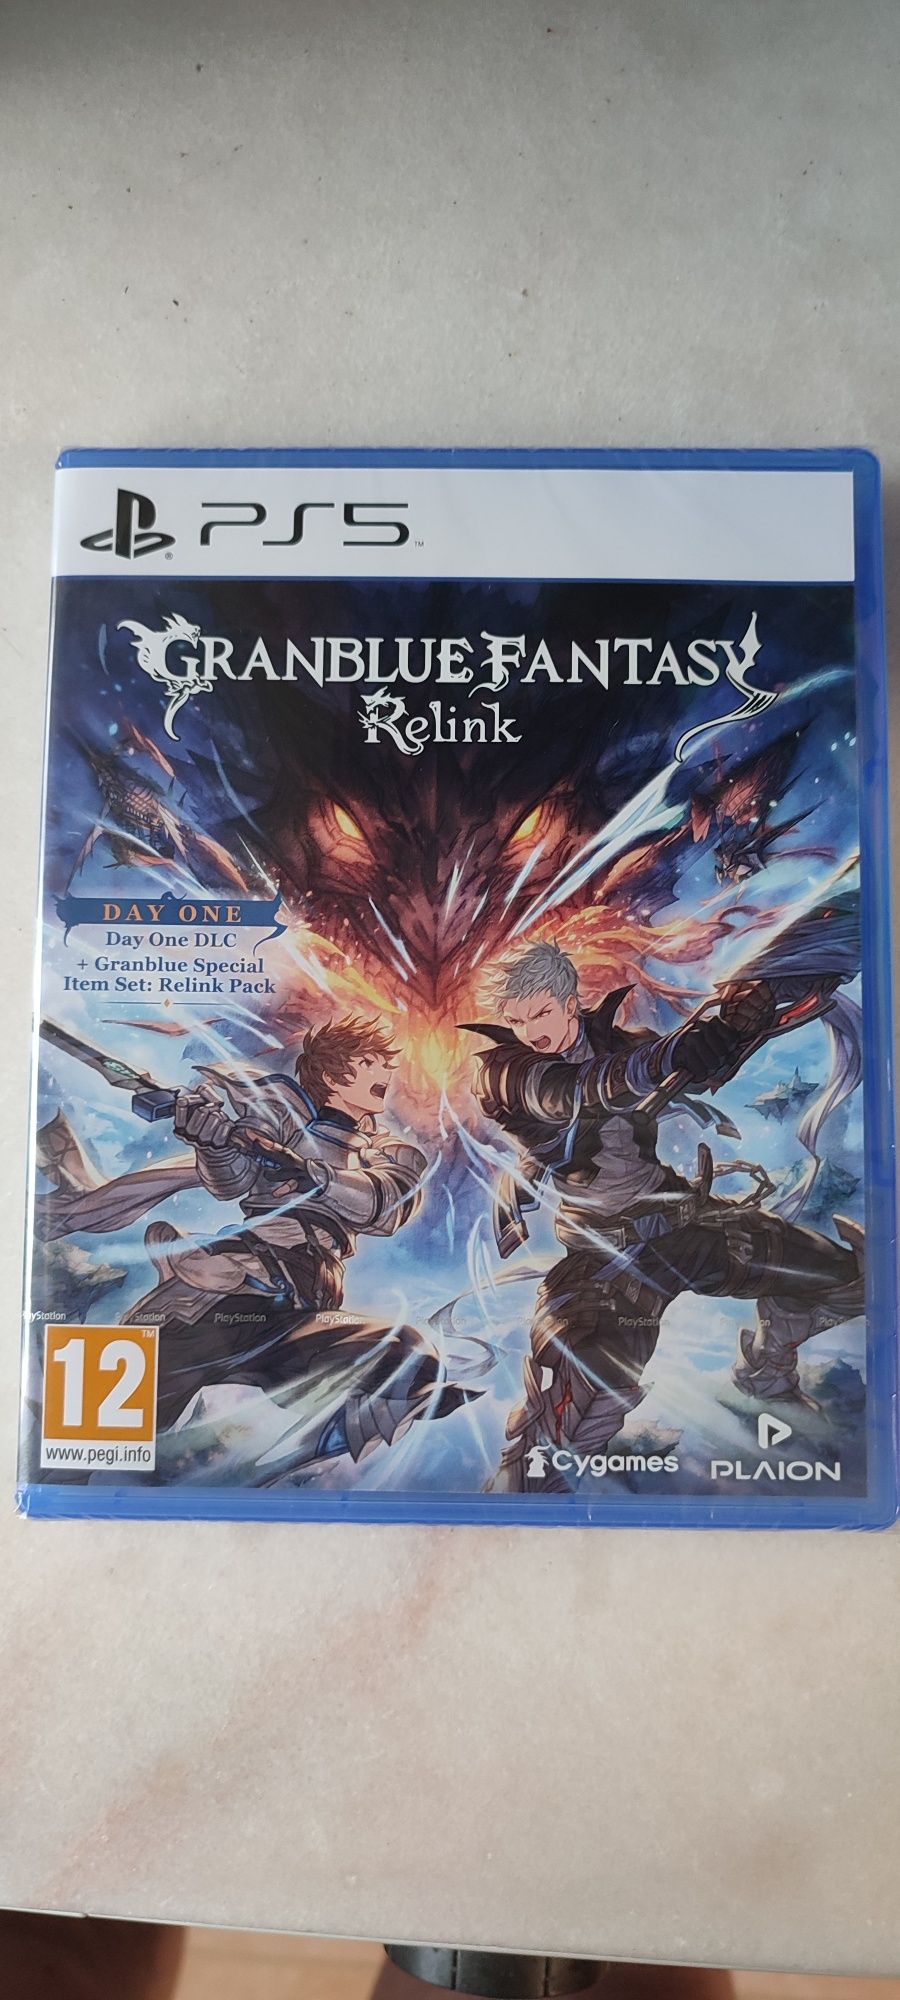 Granblue Fantasy: Relink PS5 [Day One]